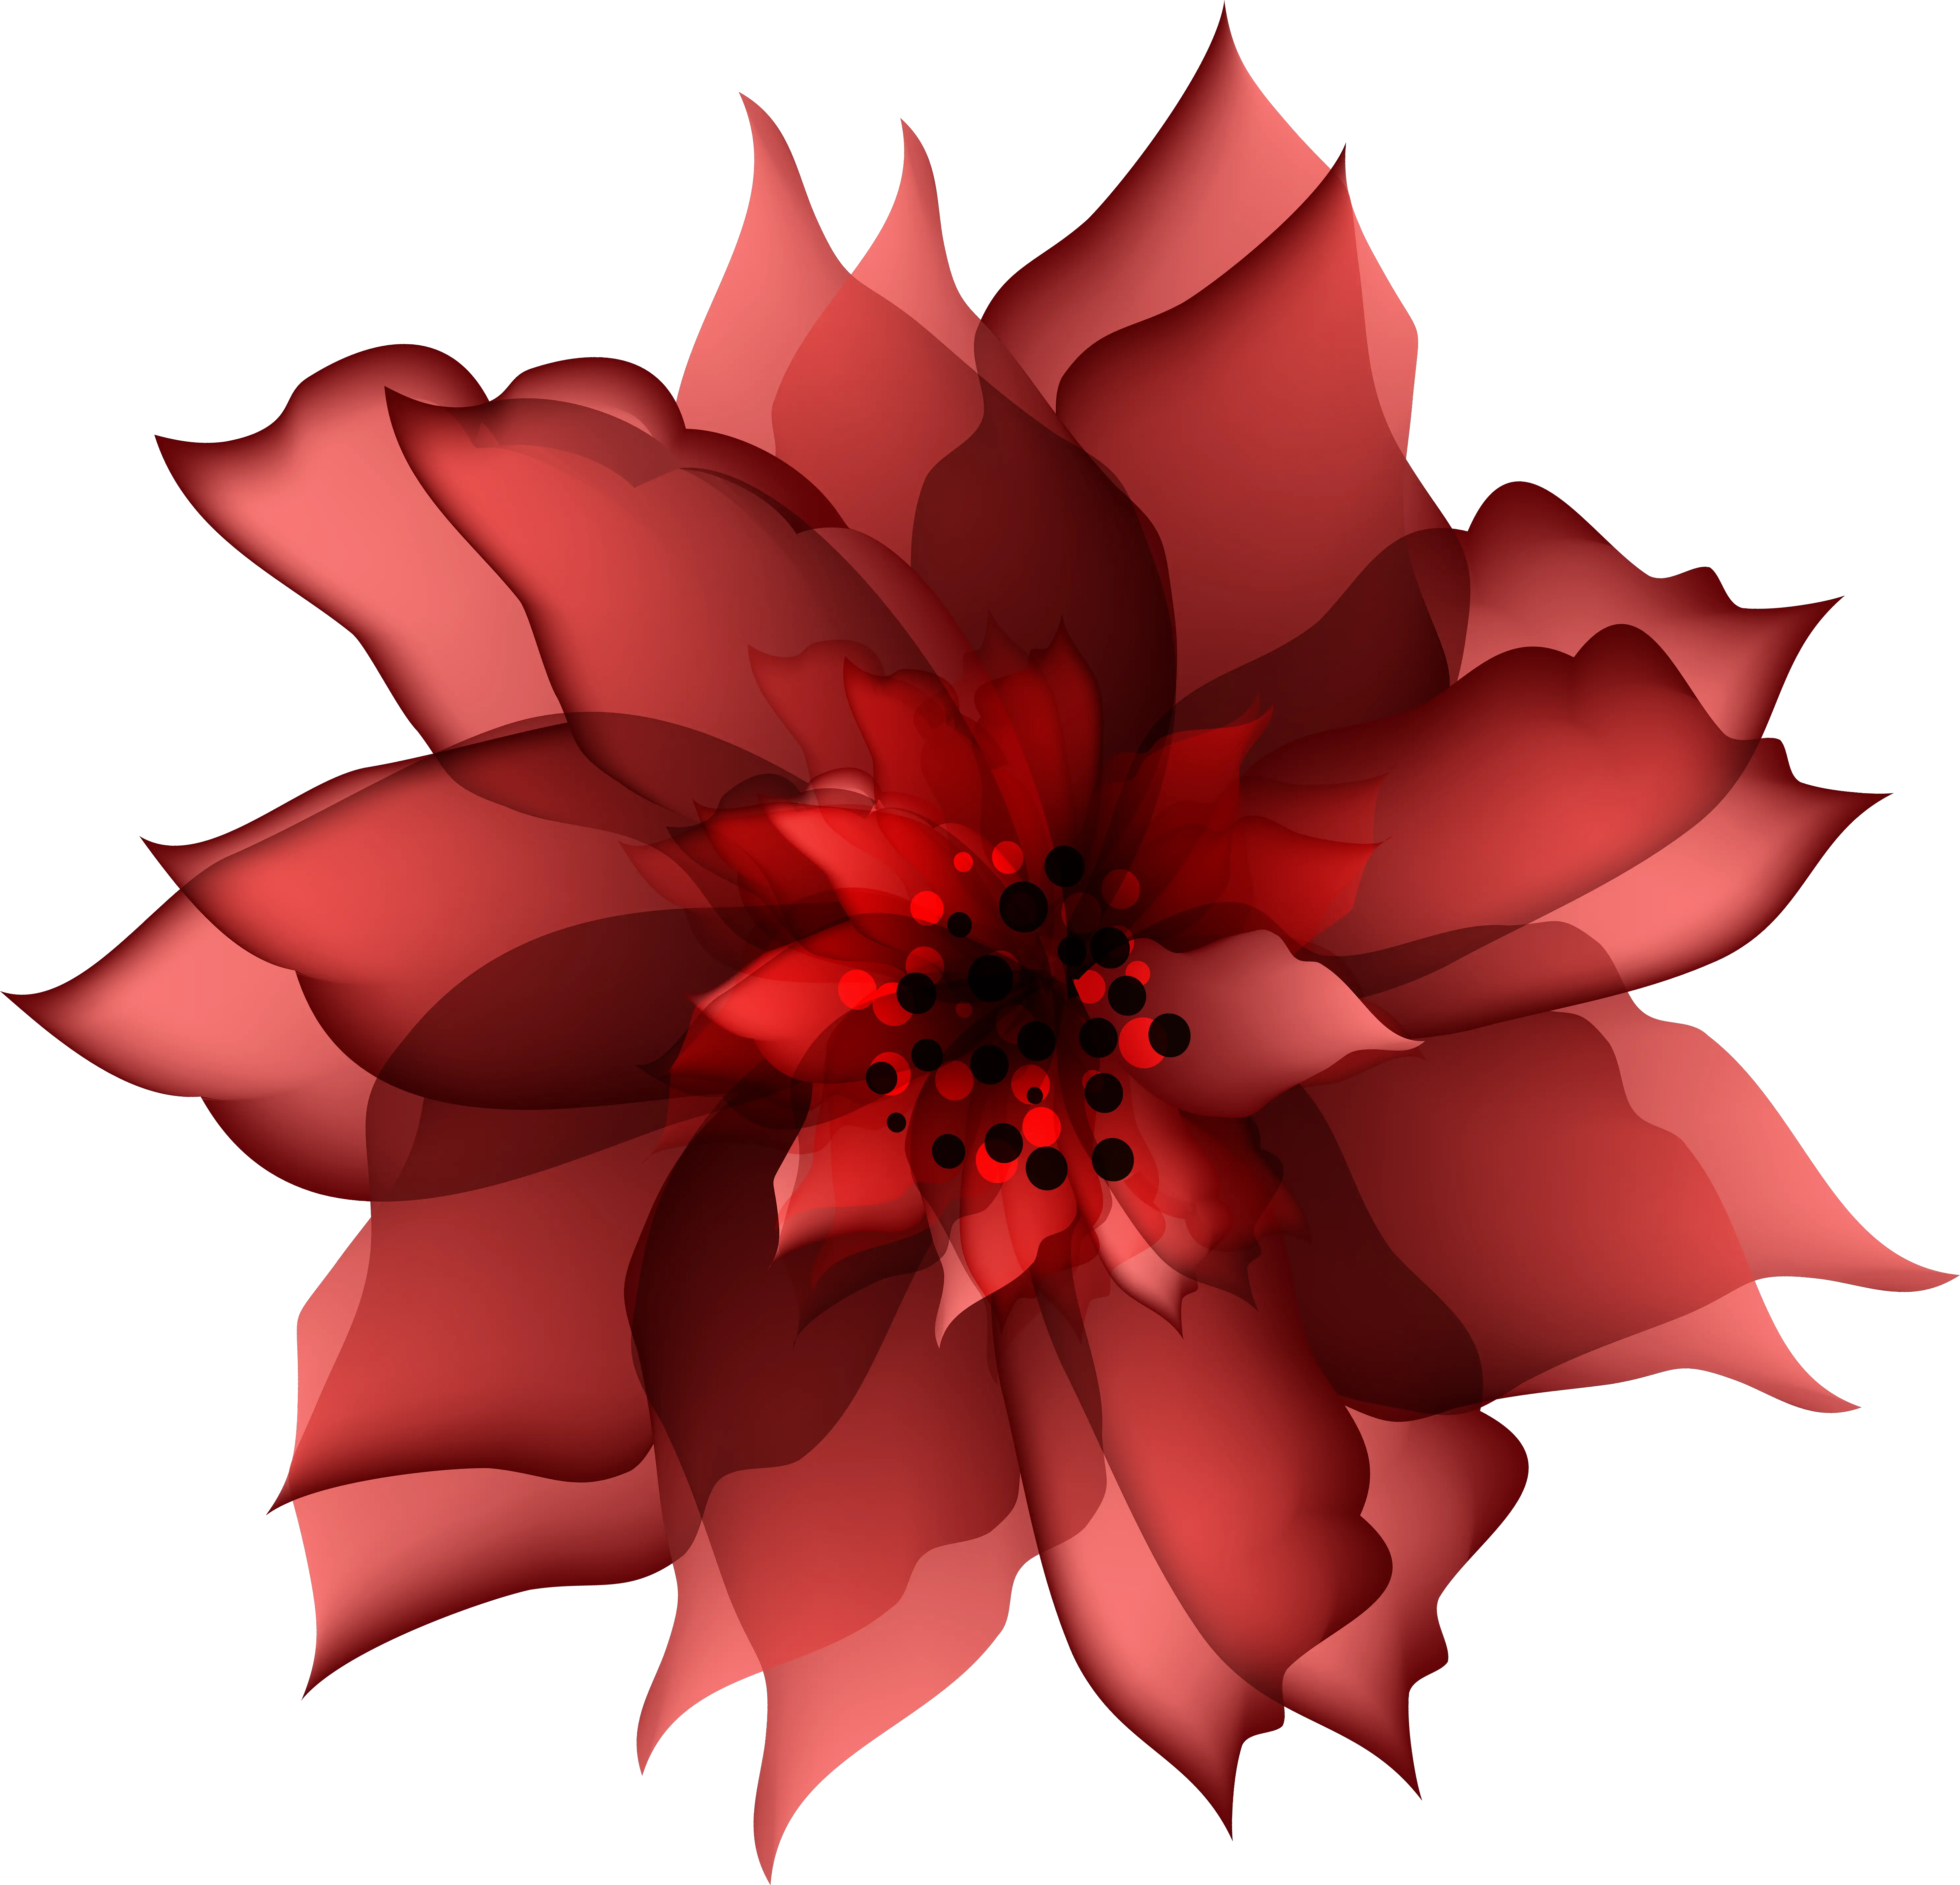 Red Flower Clip Art Decorative Flower Red Transparent Png Blue Flowers Png Transparent Flowers Clipart Png